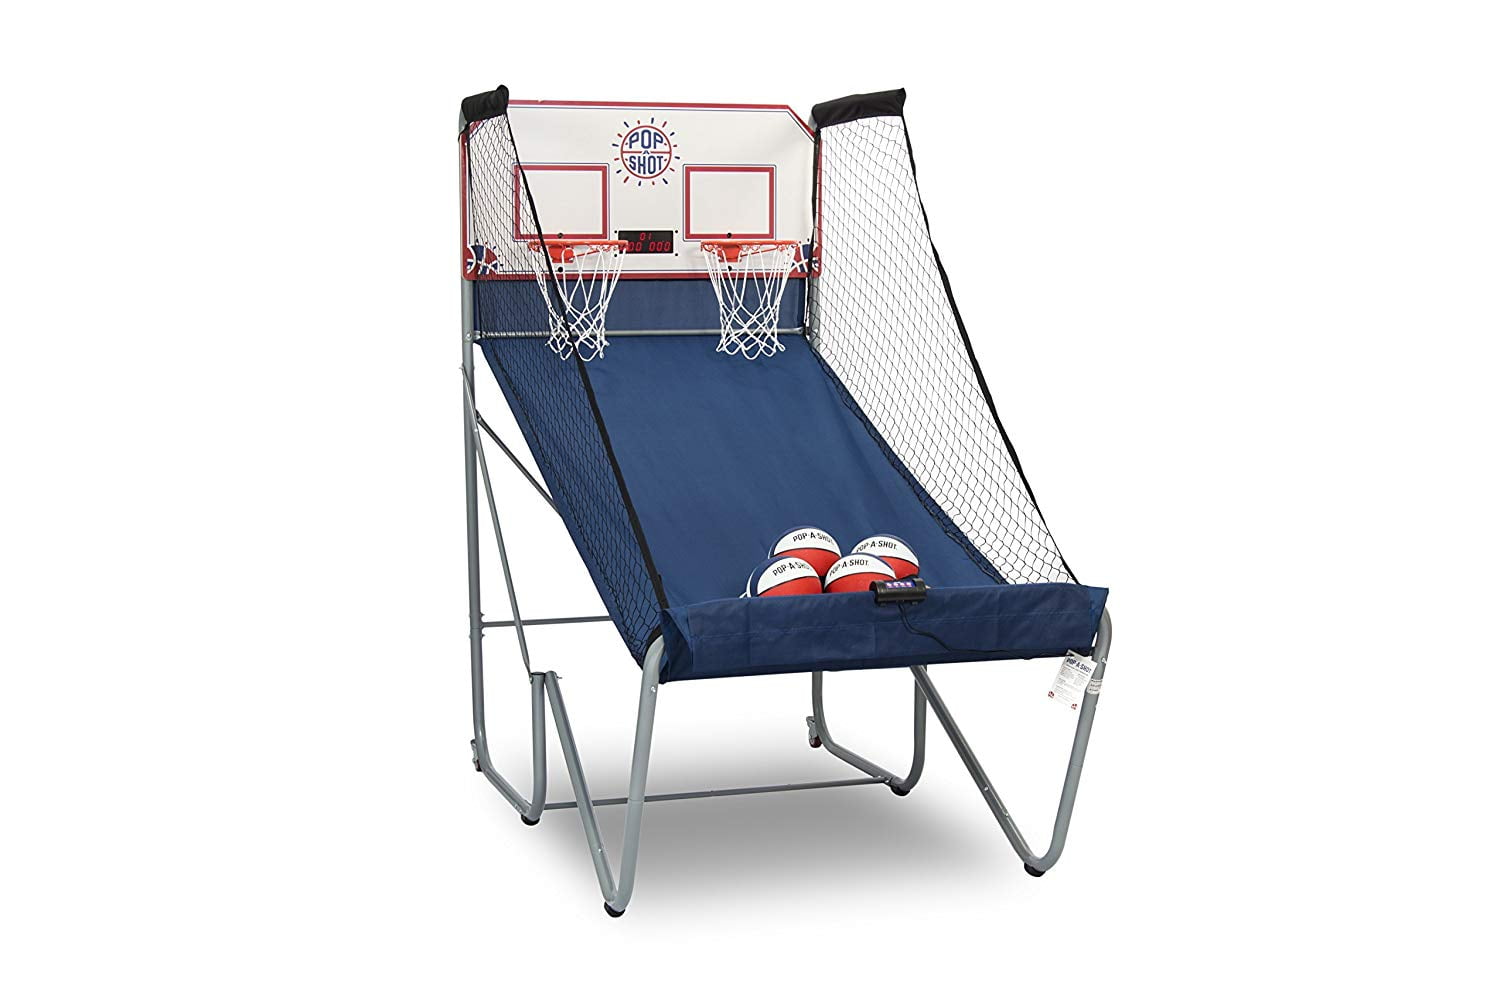 Years 7ft Pop A Shot 2 Player Competitive Play Arcade Basketball Game For Age 3 